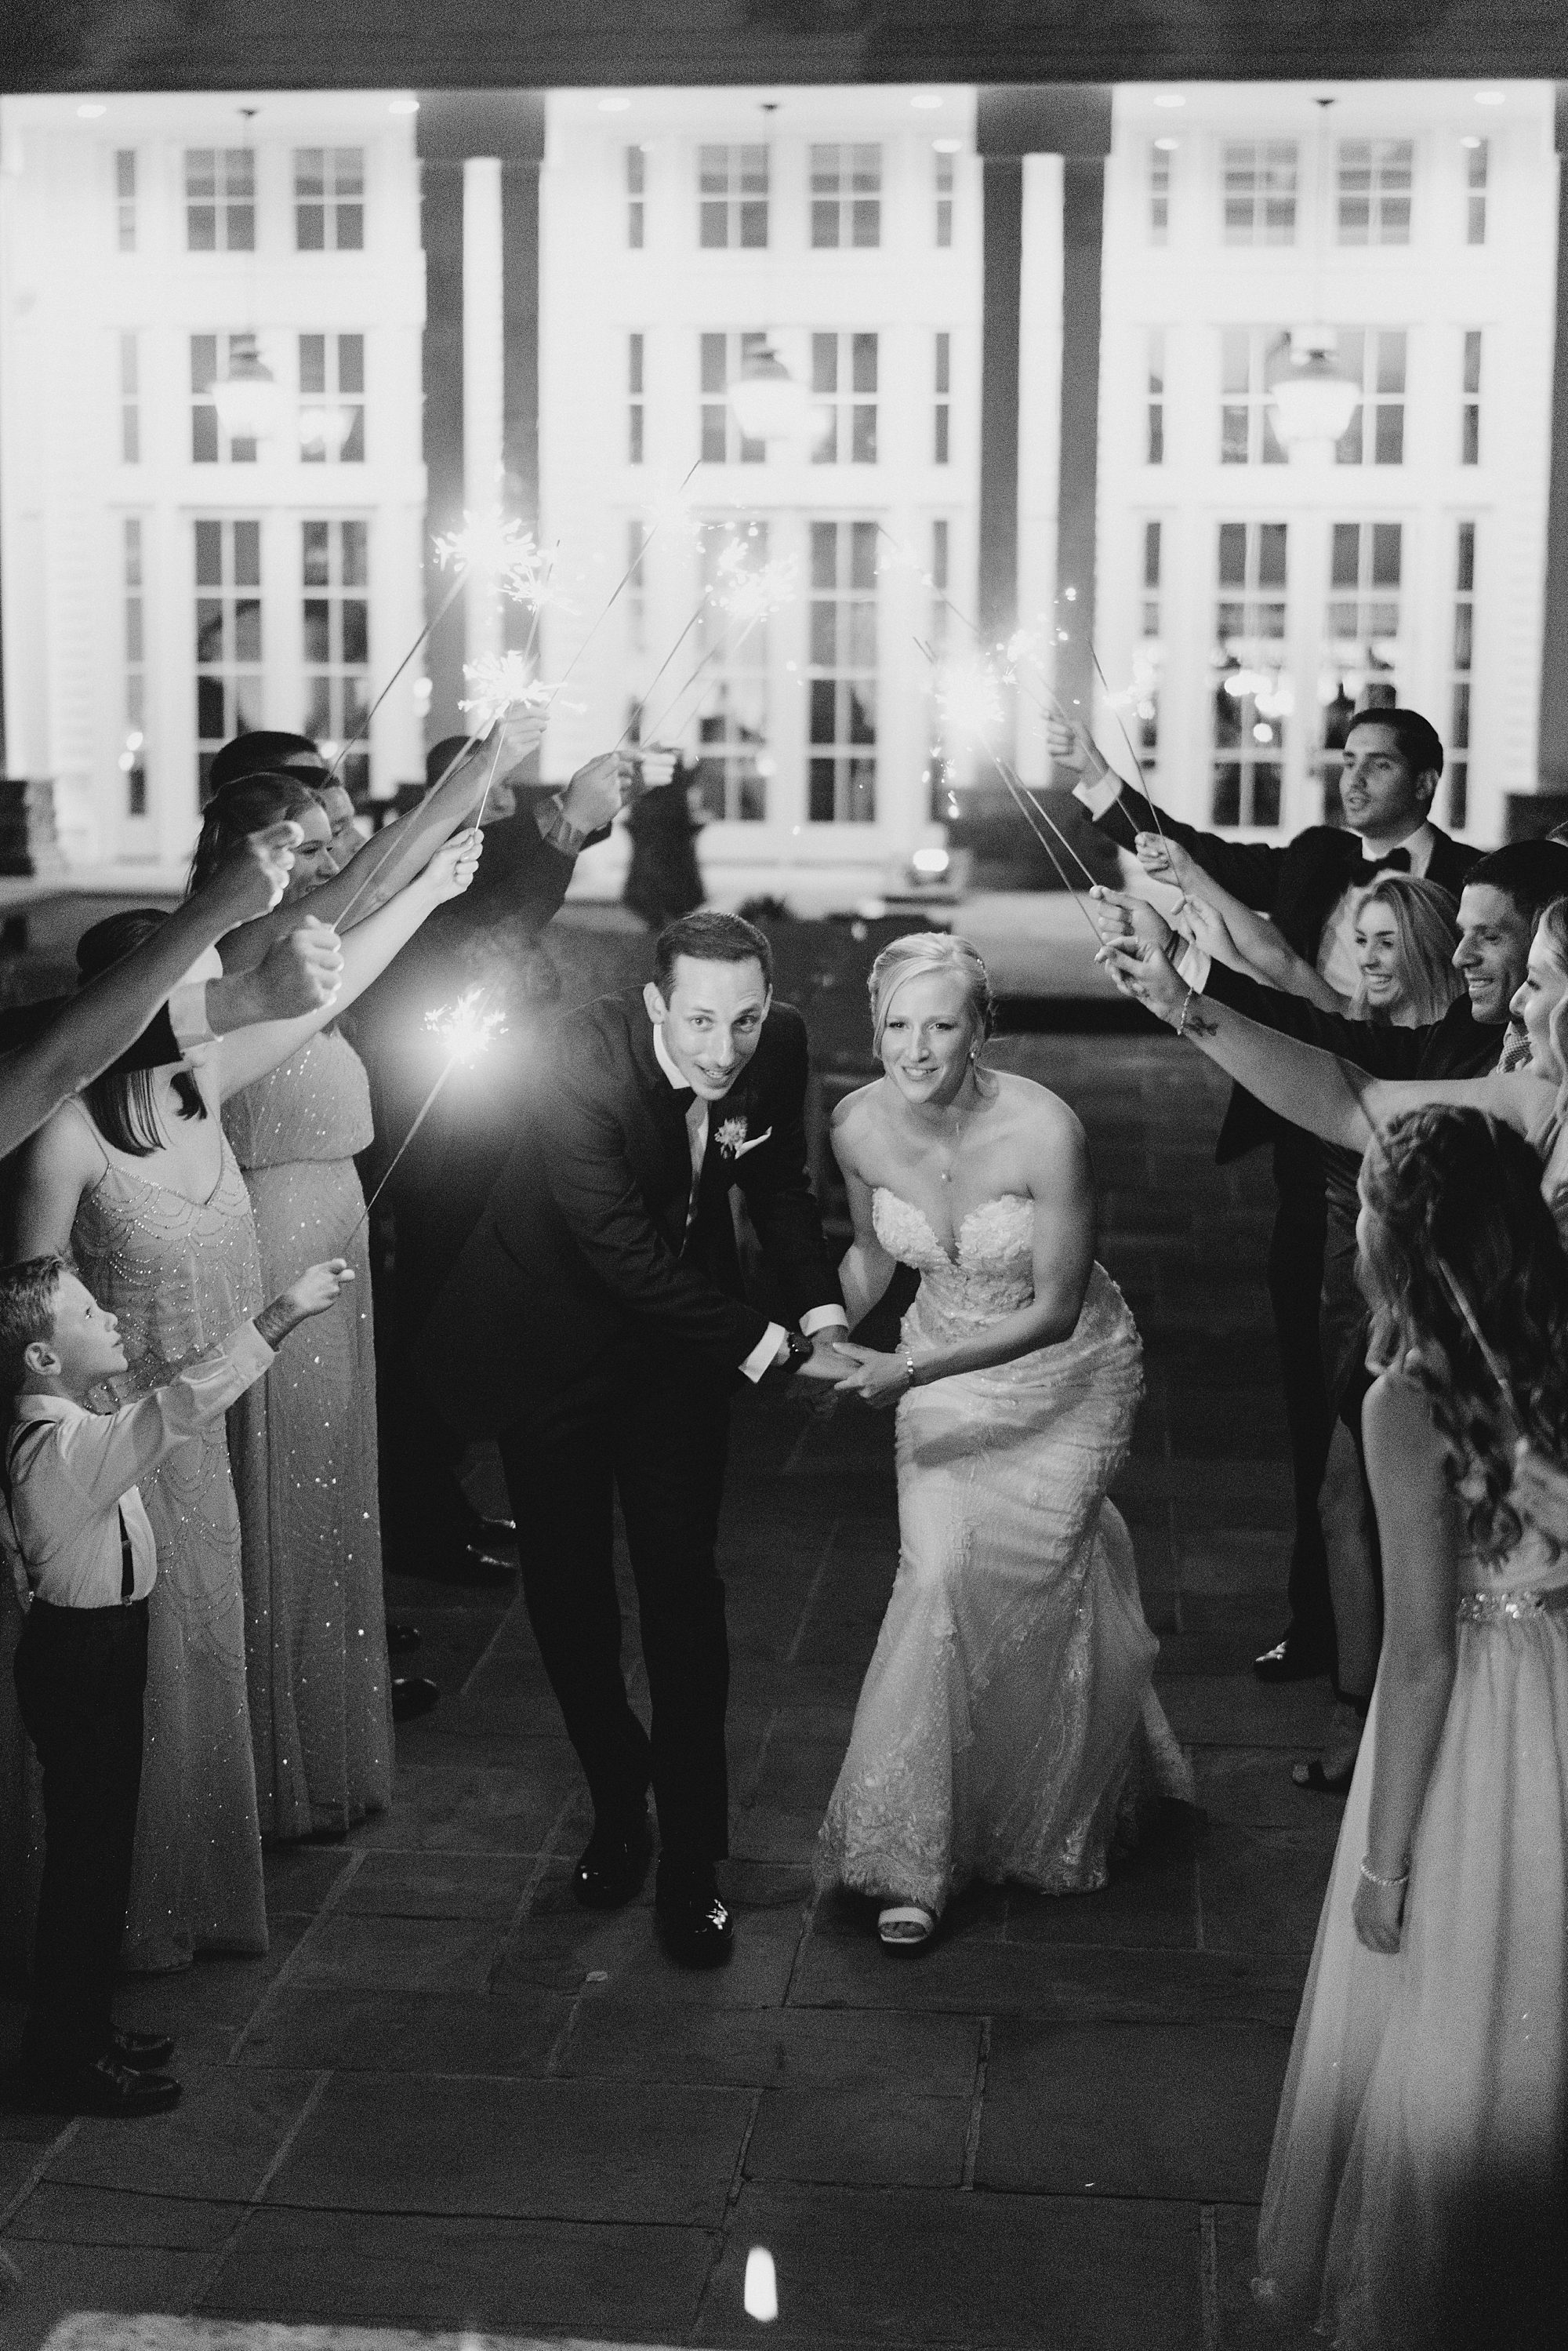 guests hold up sparklers as couple exit the reception